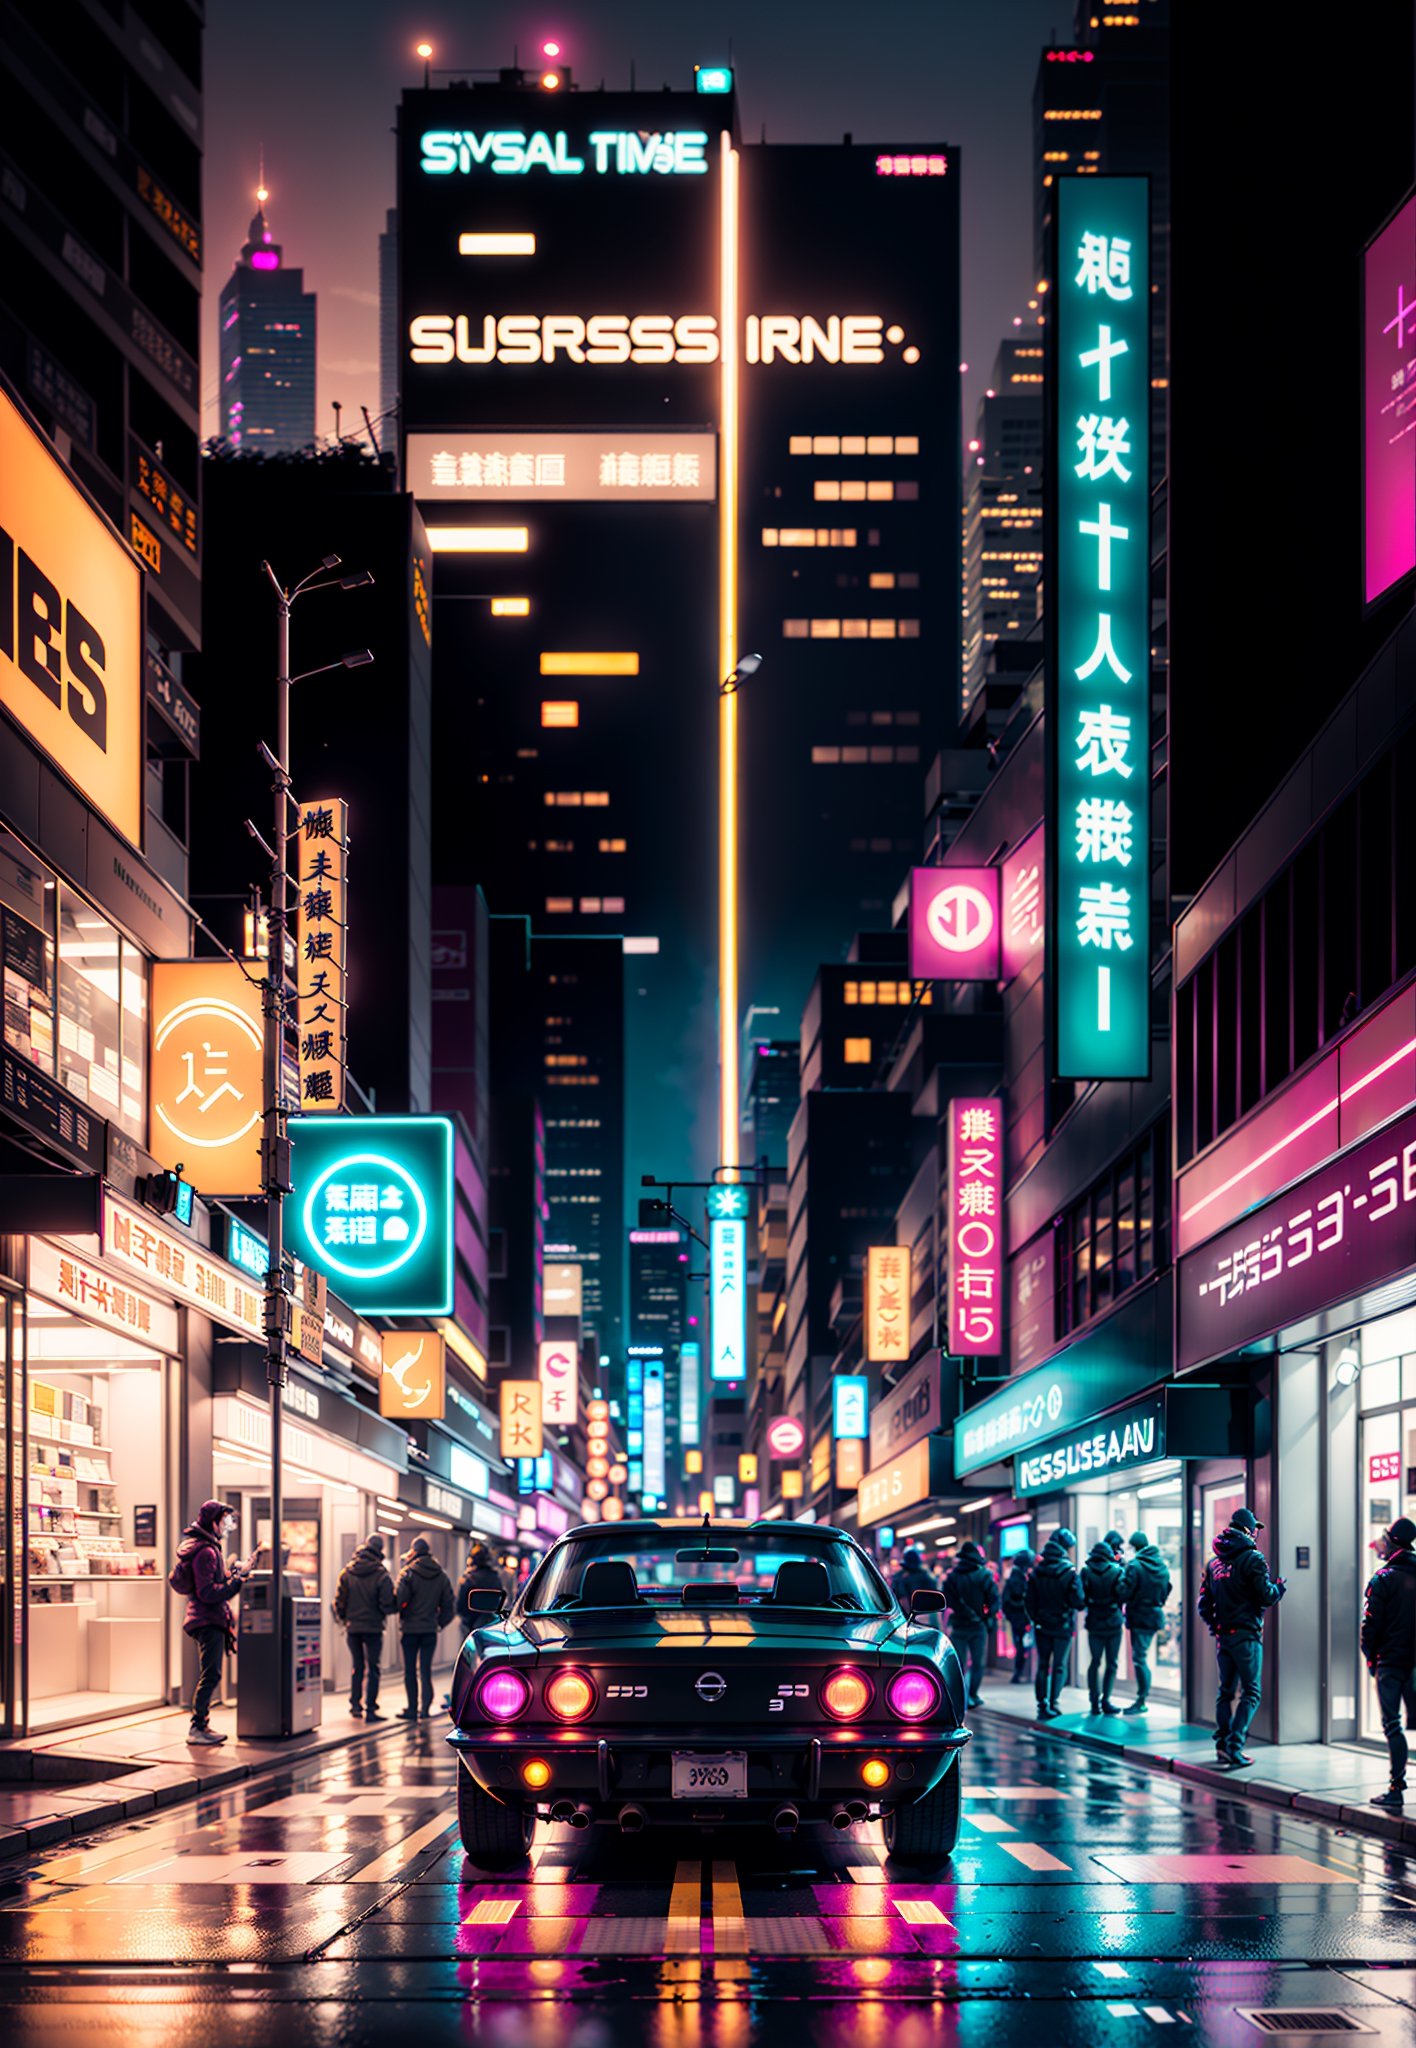 retrowave。City, 1969 Nissan S30, wide body kit, pathway, PURPLE NEON MONITOR LIGHT, sunont,The Car。cyber punk perssonage,City,road